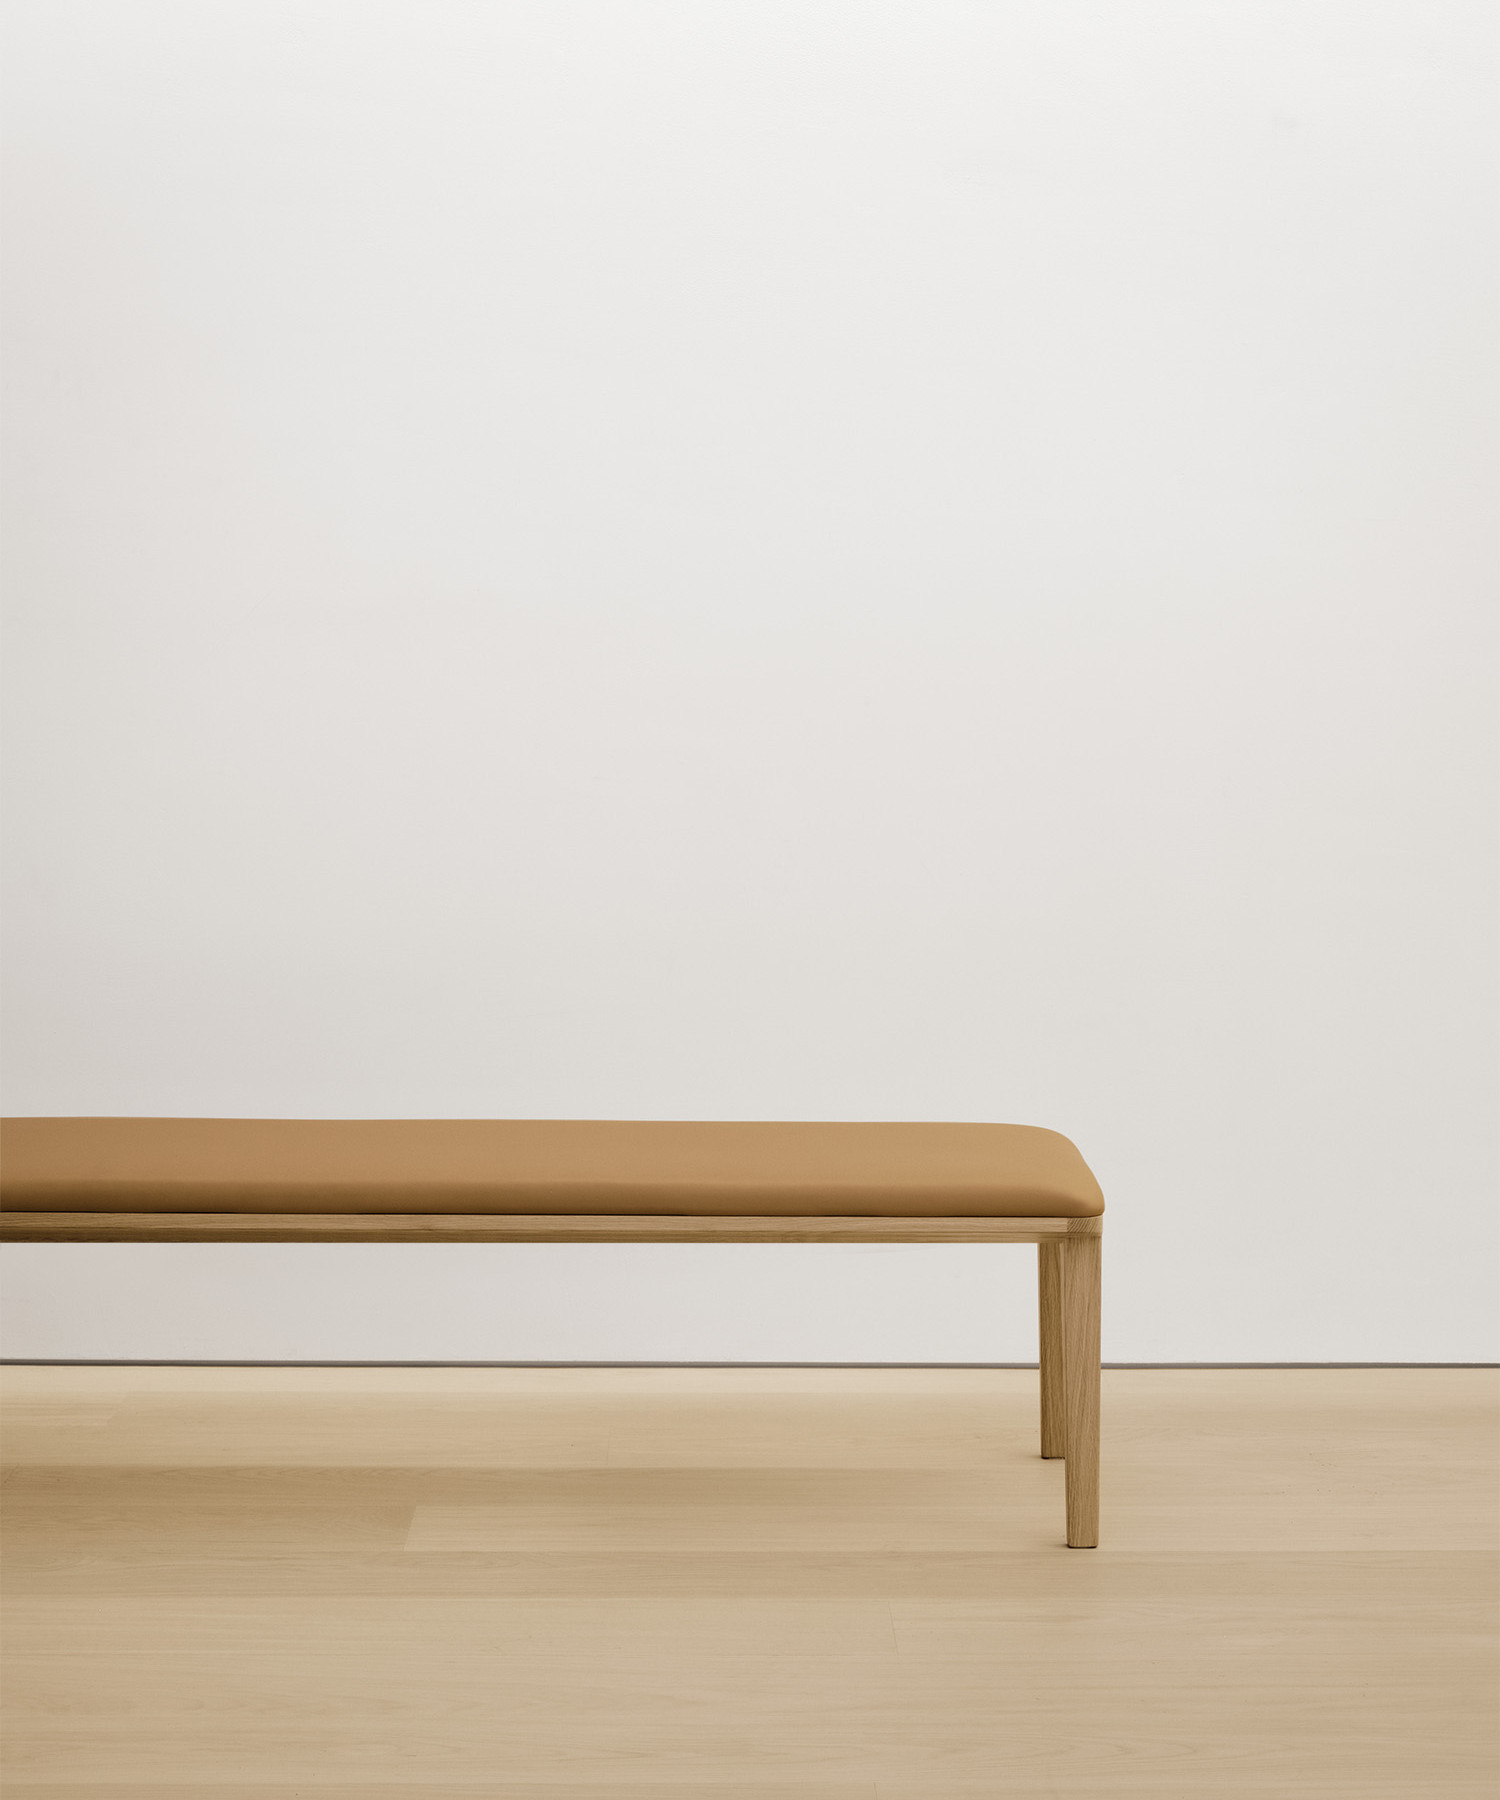   bench with solid wood seat